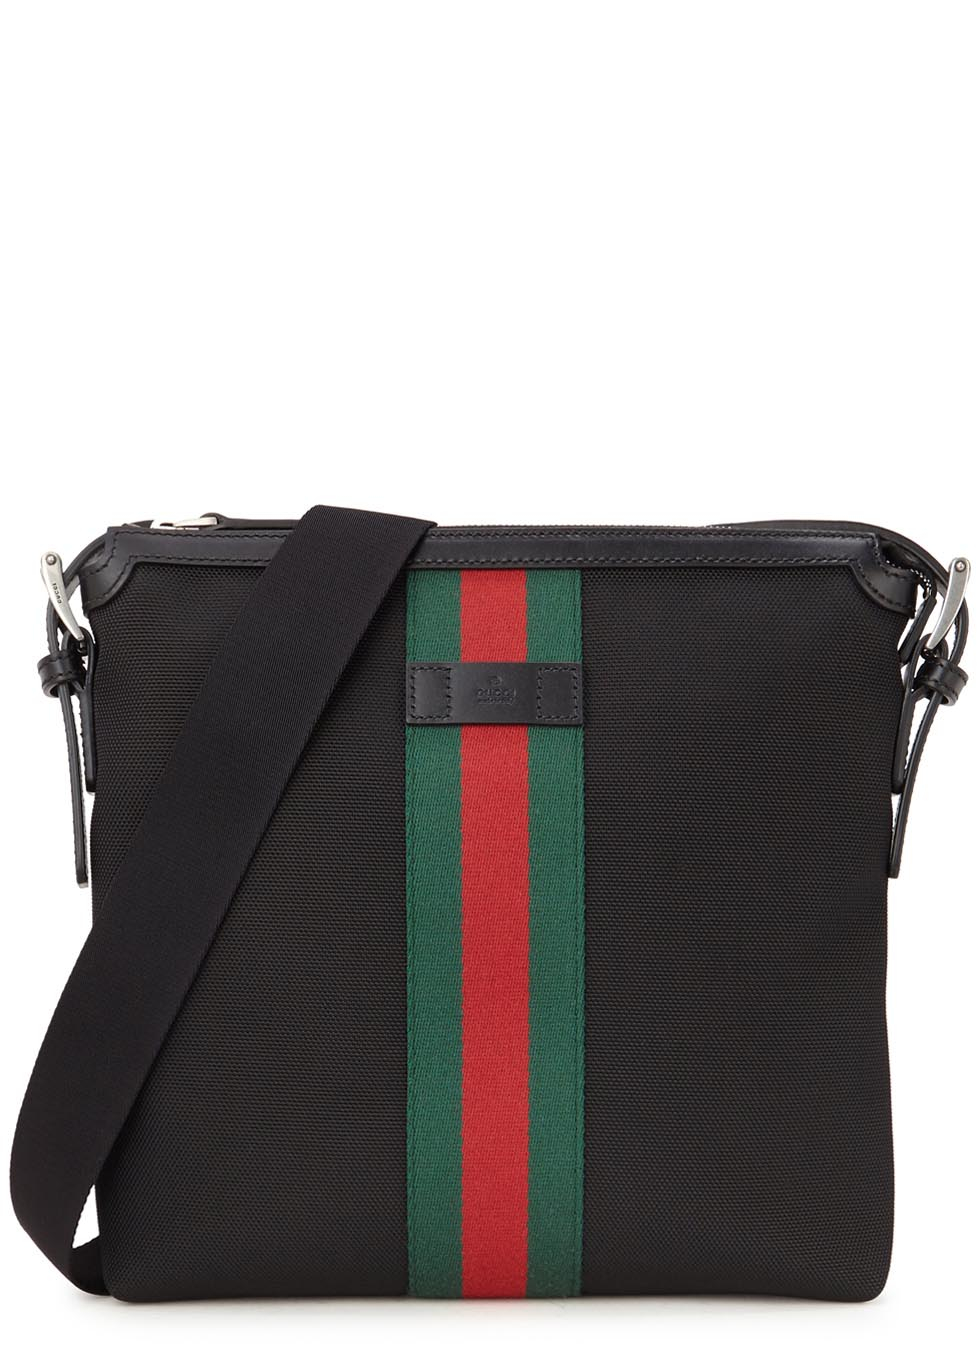 Gucci Web Small Canvas Cross-body Bag in Black for Men - Lyst